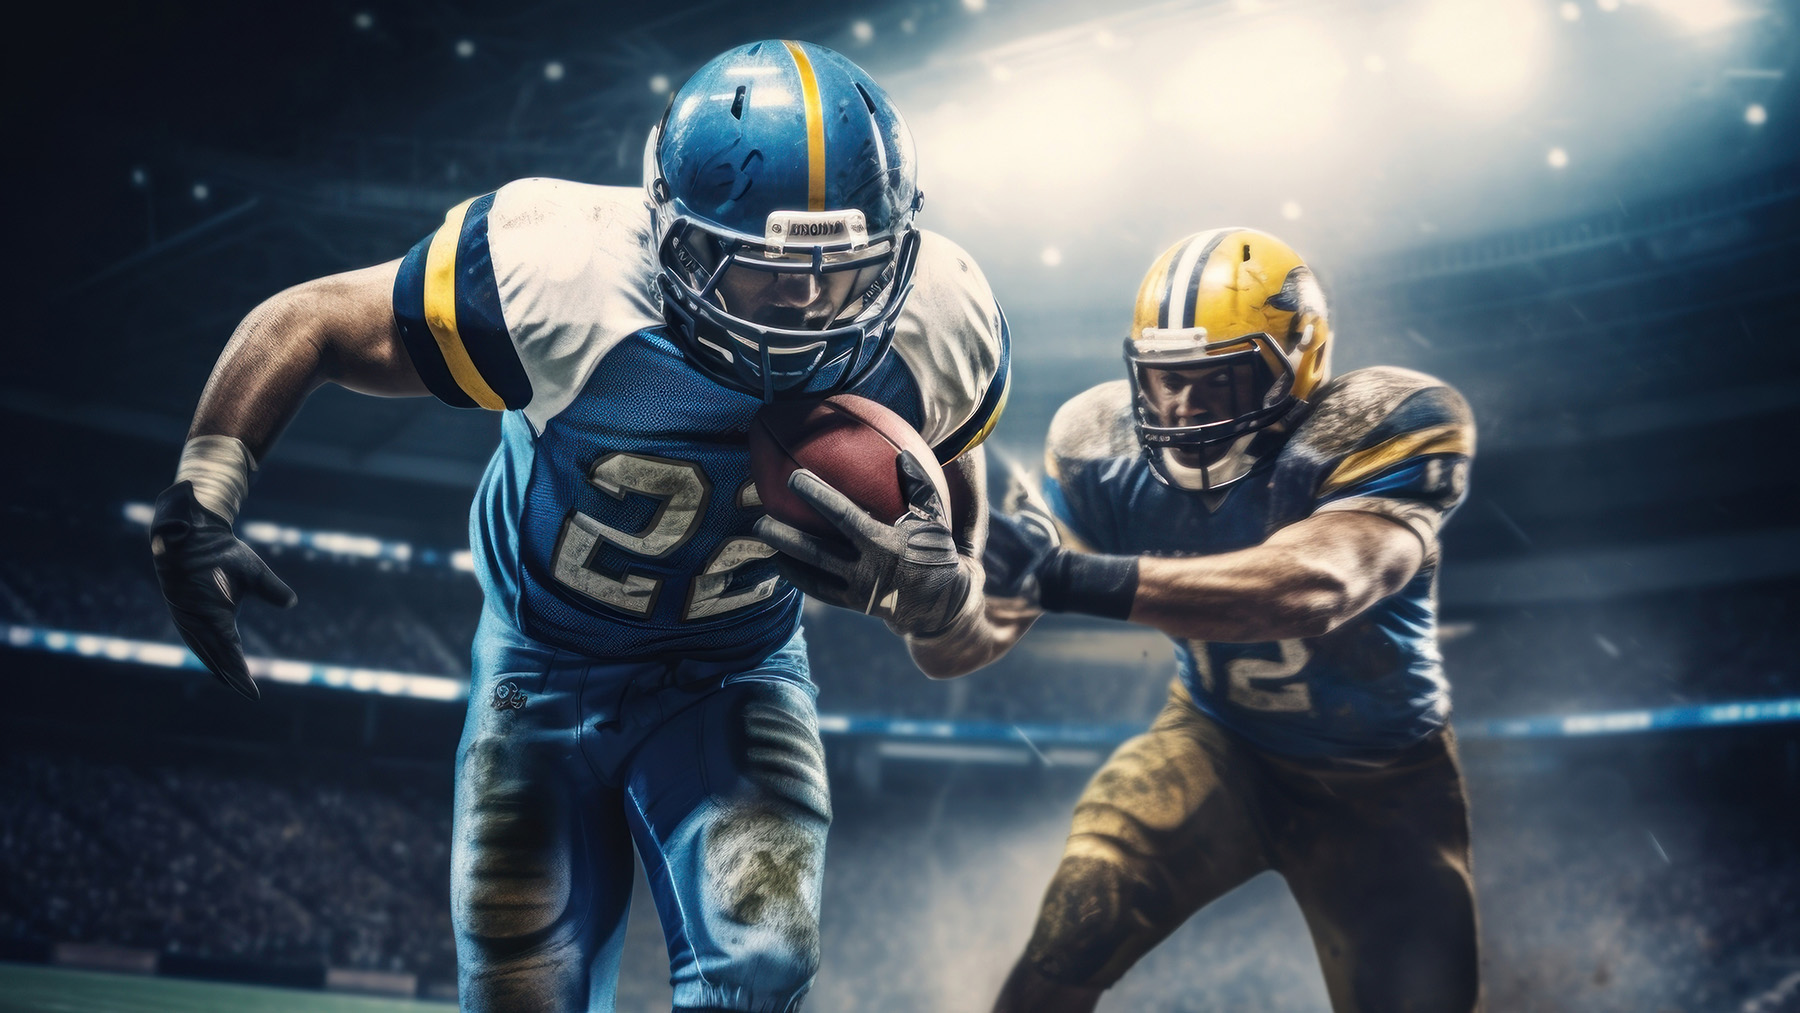 Stock photo of two American football players running in a packed stadium (Image by RawPixel.com)